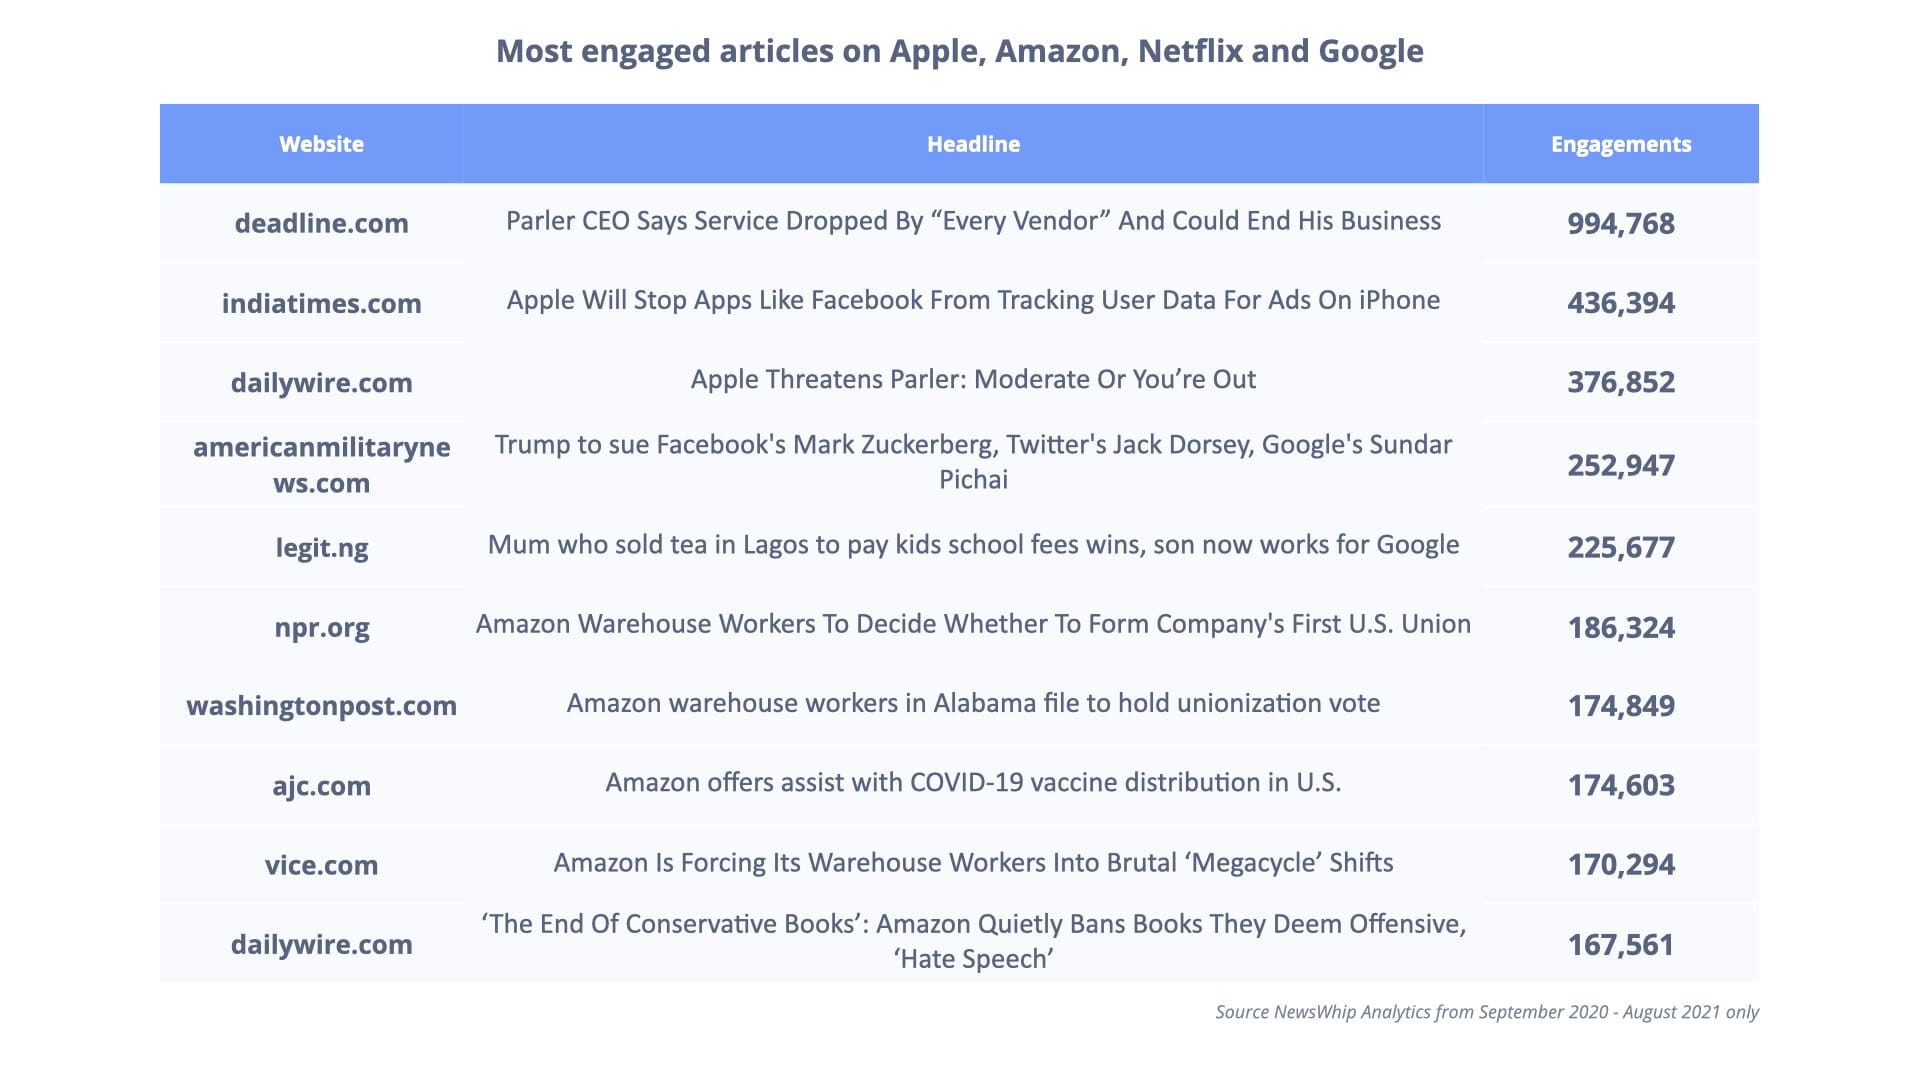 Chart showing the most engaged articles on Apple, Amazon, Netflix and Google